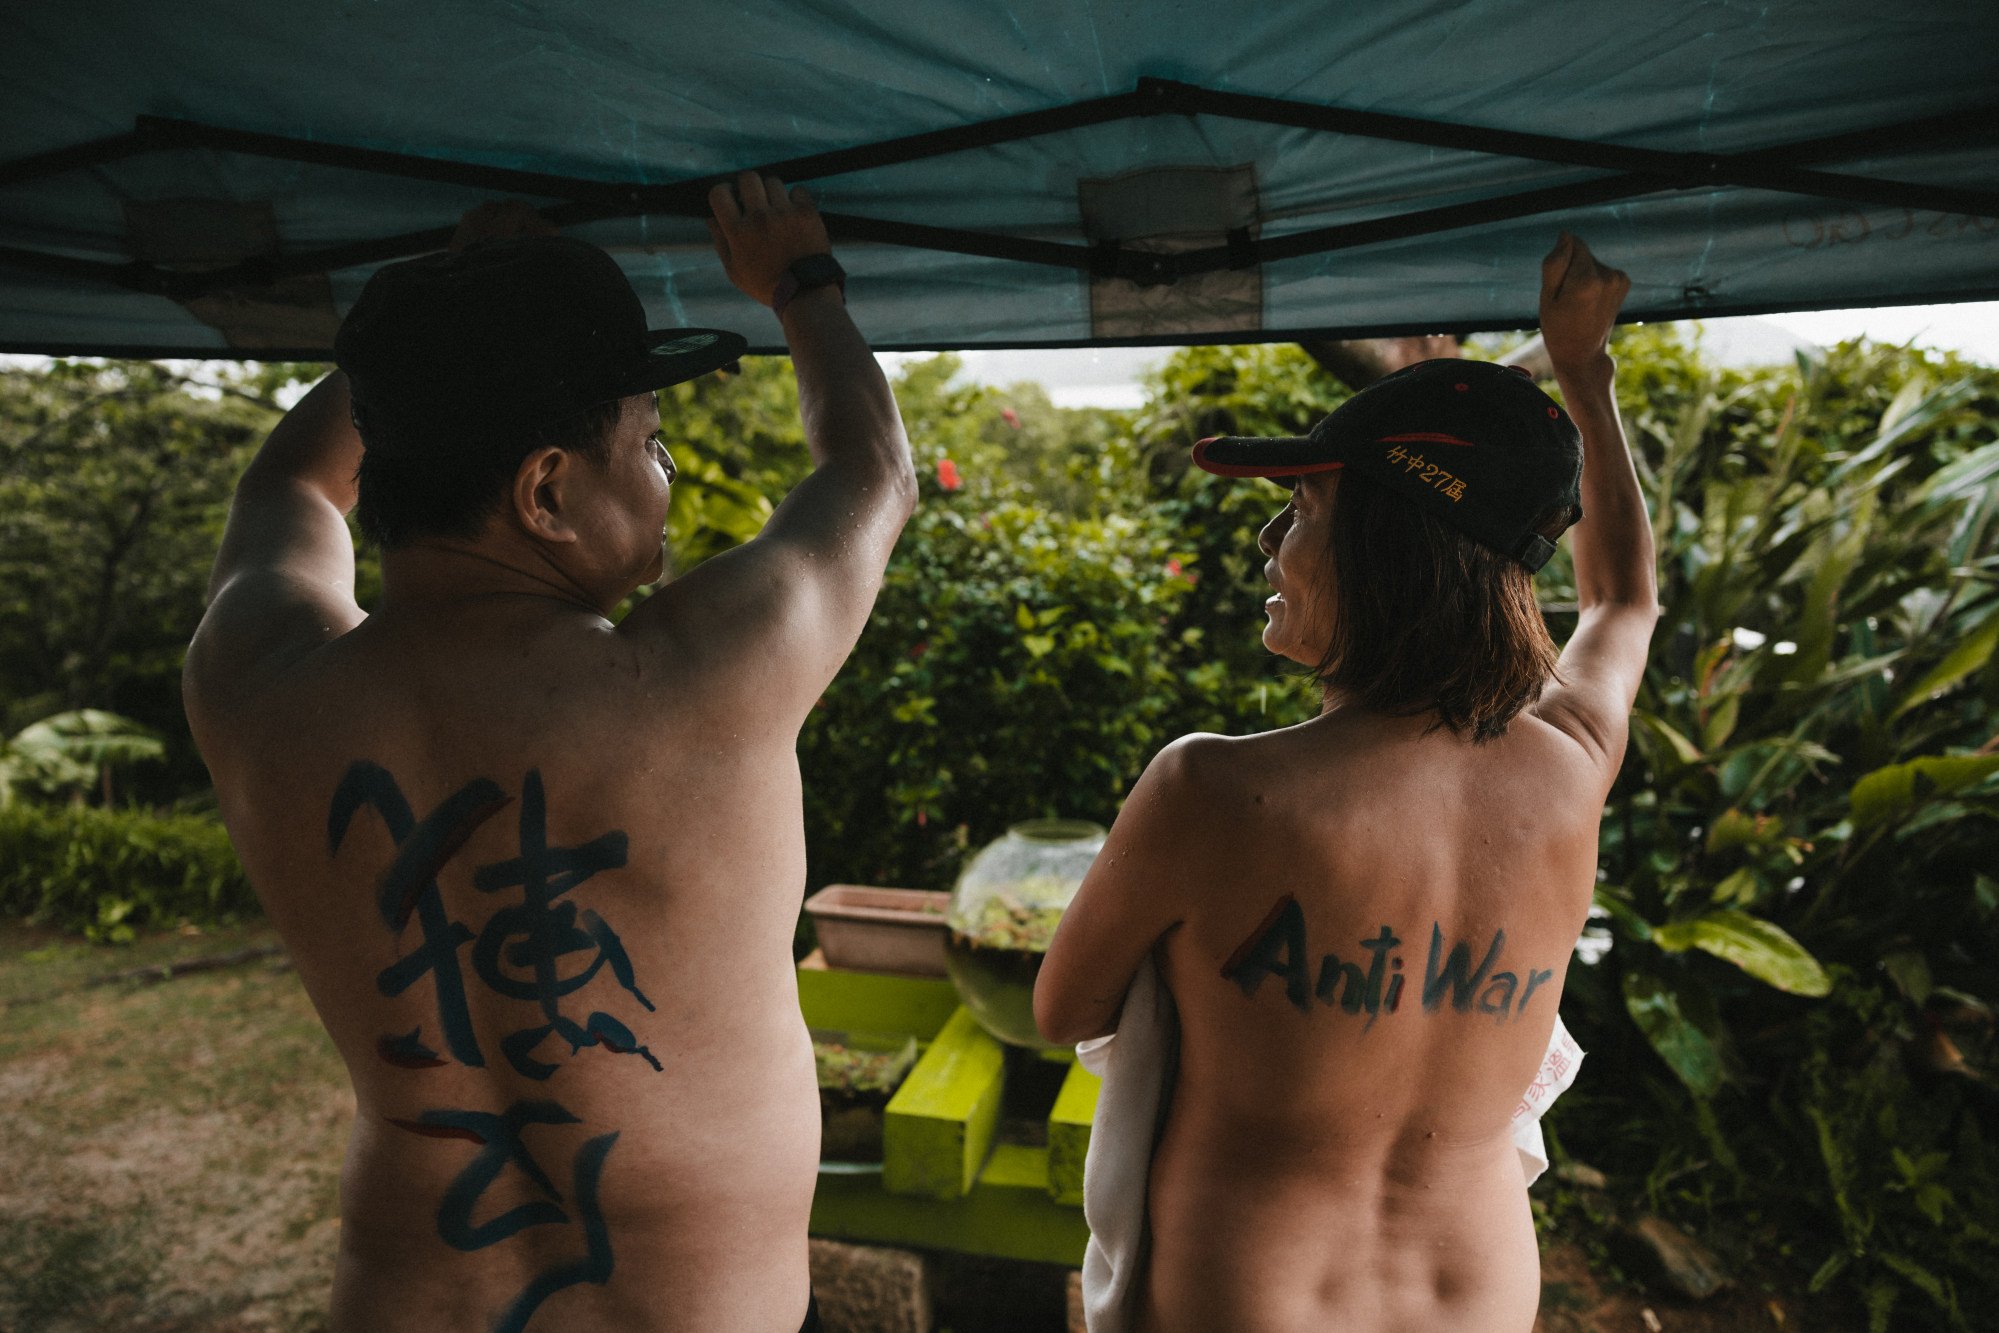 ‘freedom’: the taiwanese naturists defying social – and legal – norms while nurturing body positivity